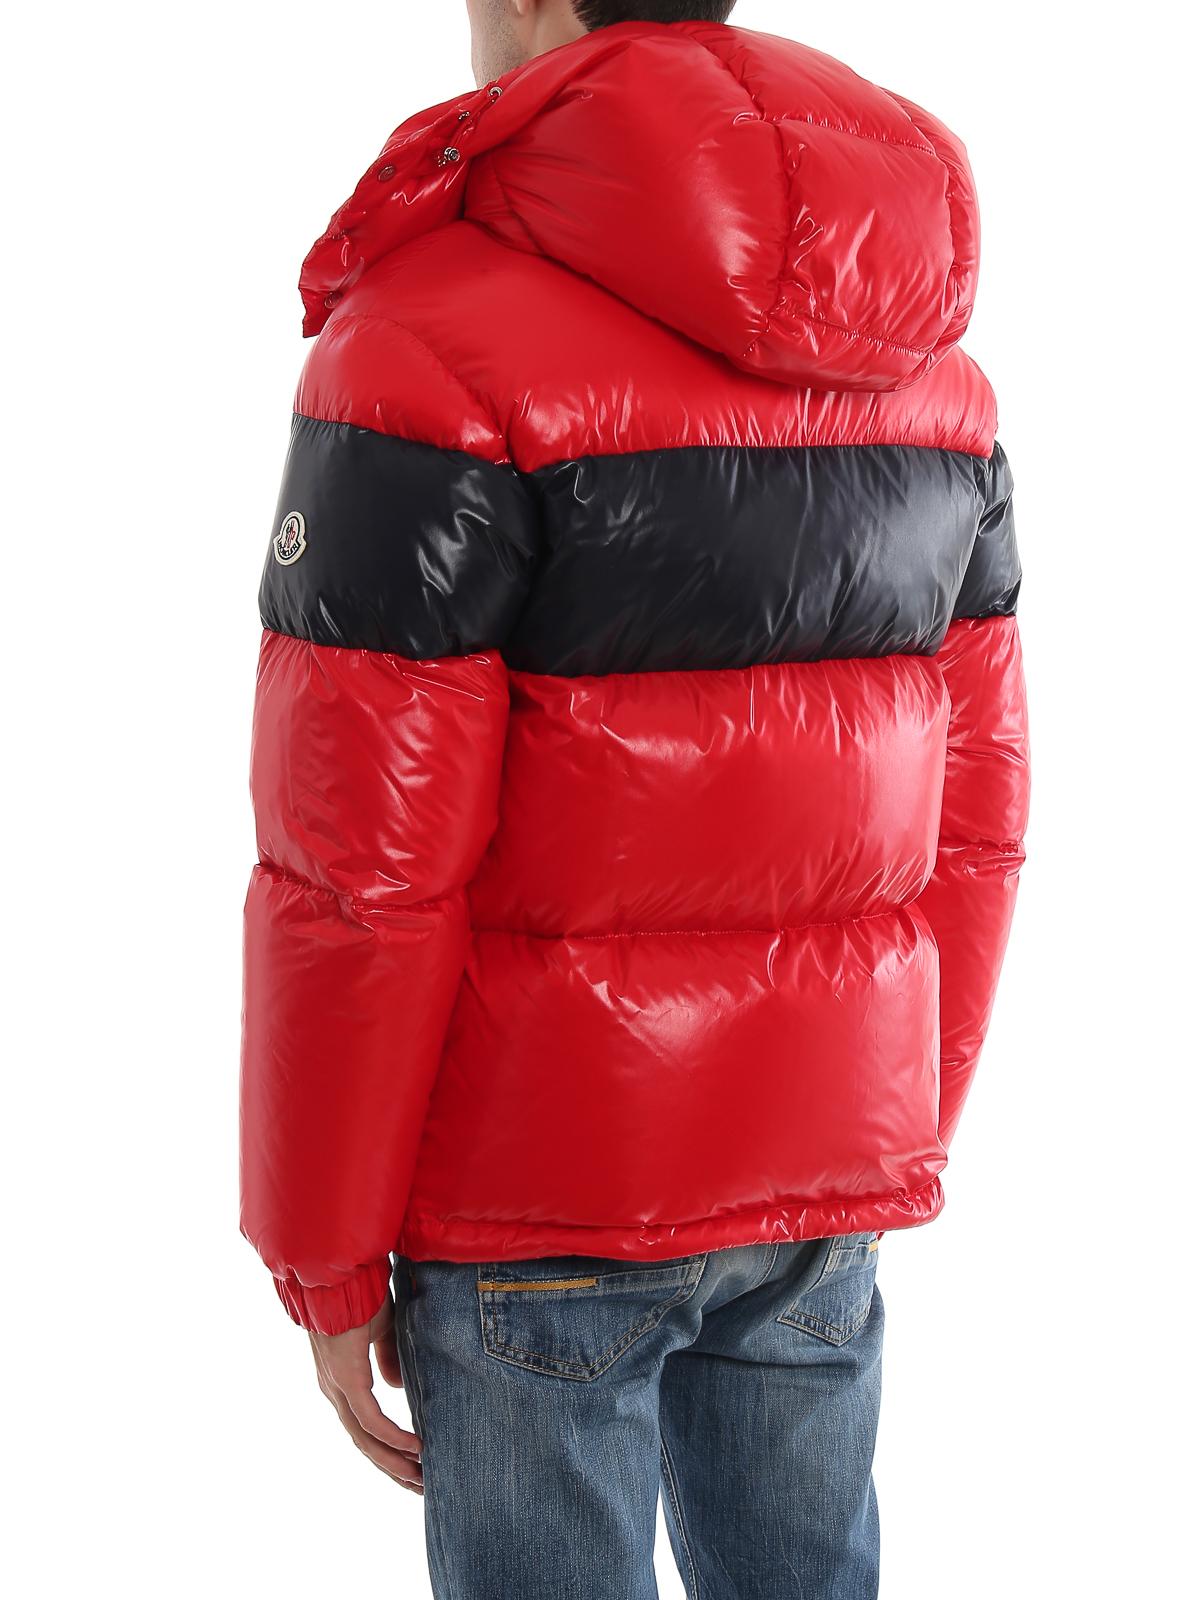 Moncler Synthetic Gary Red Puffer Jacket for Men - Lyst